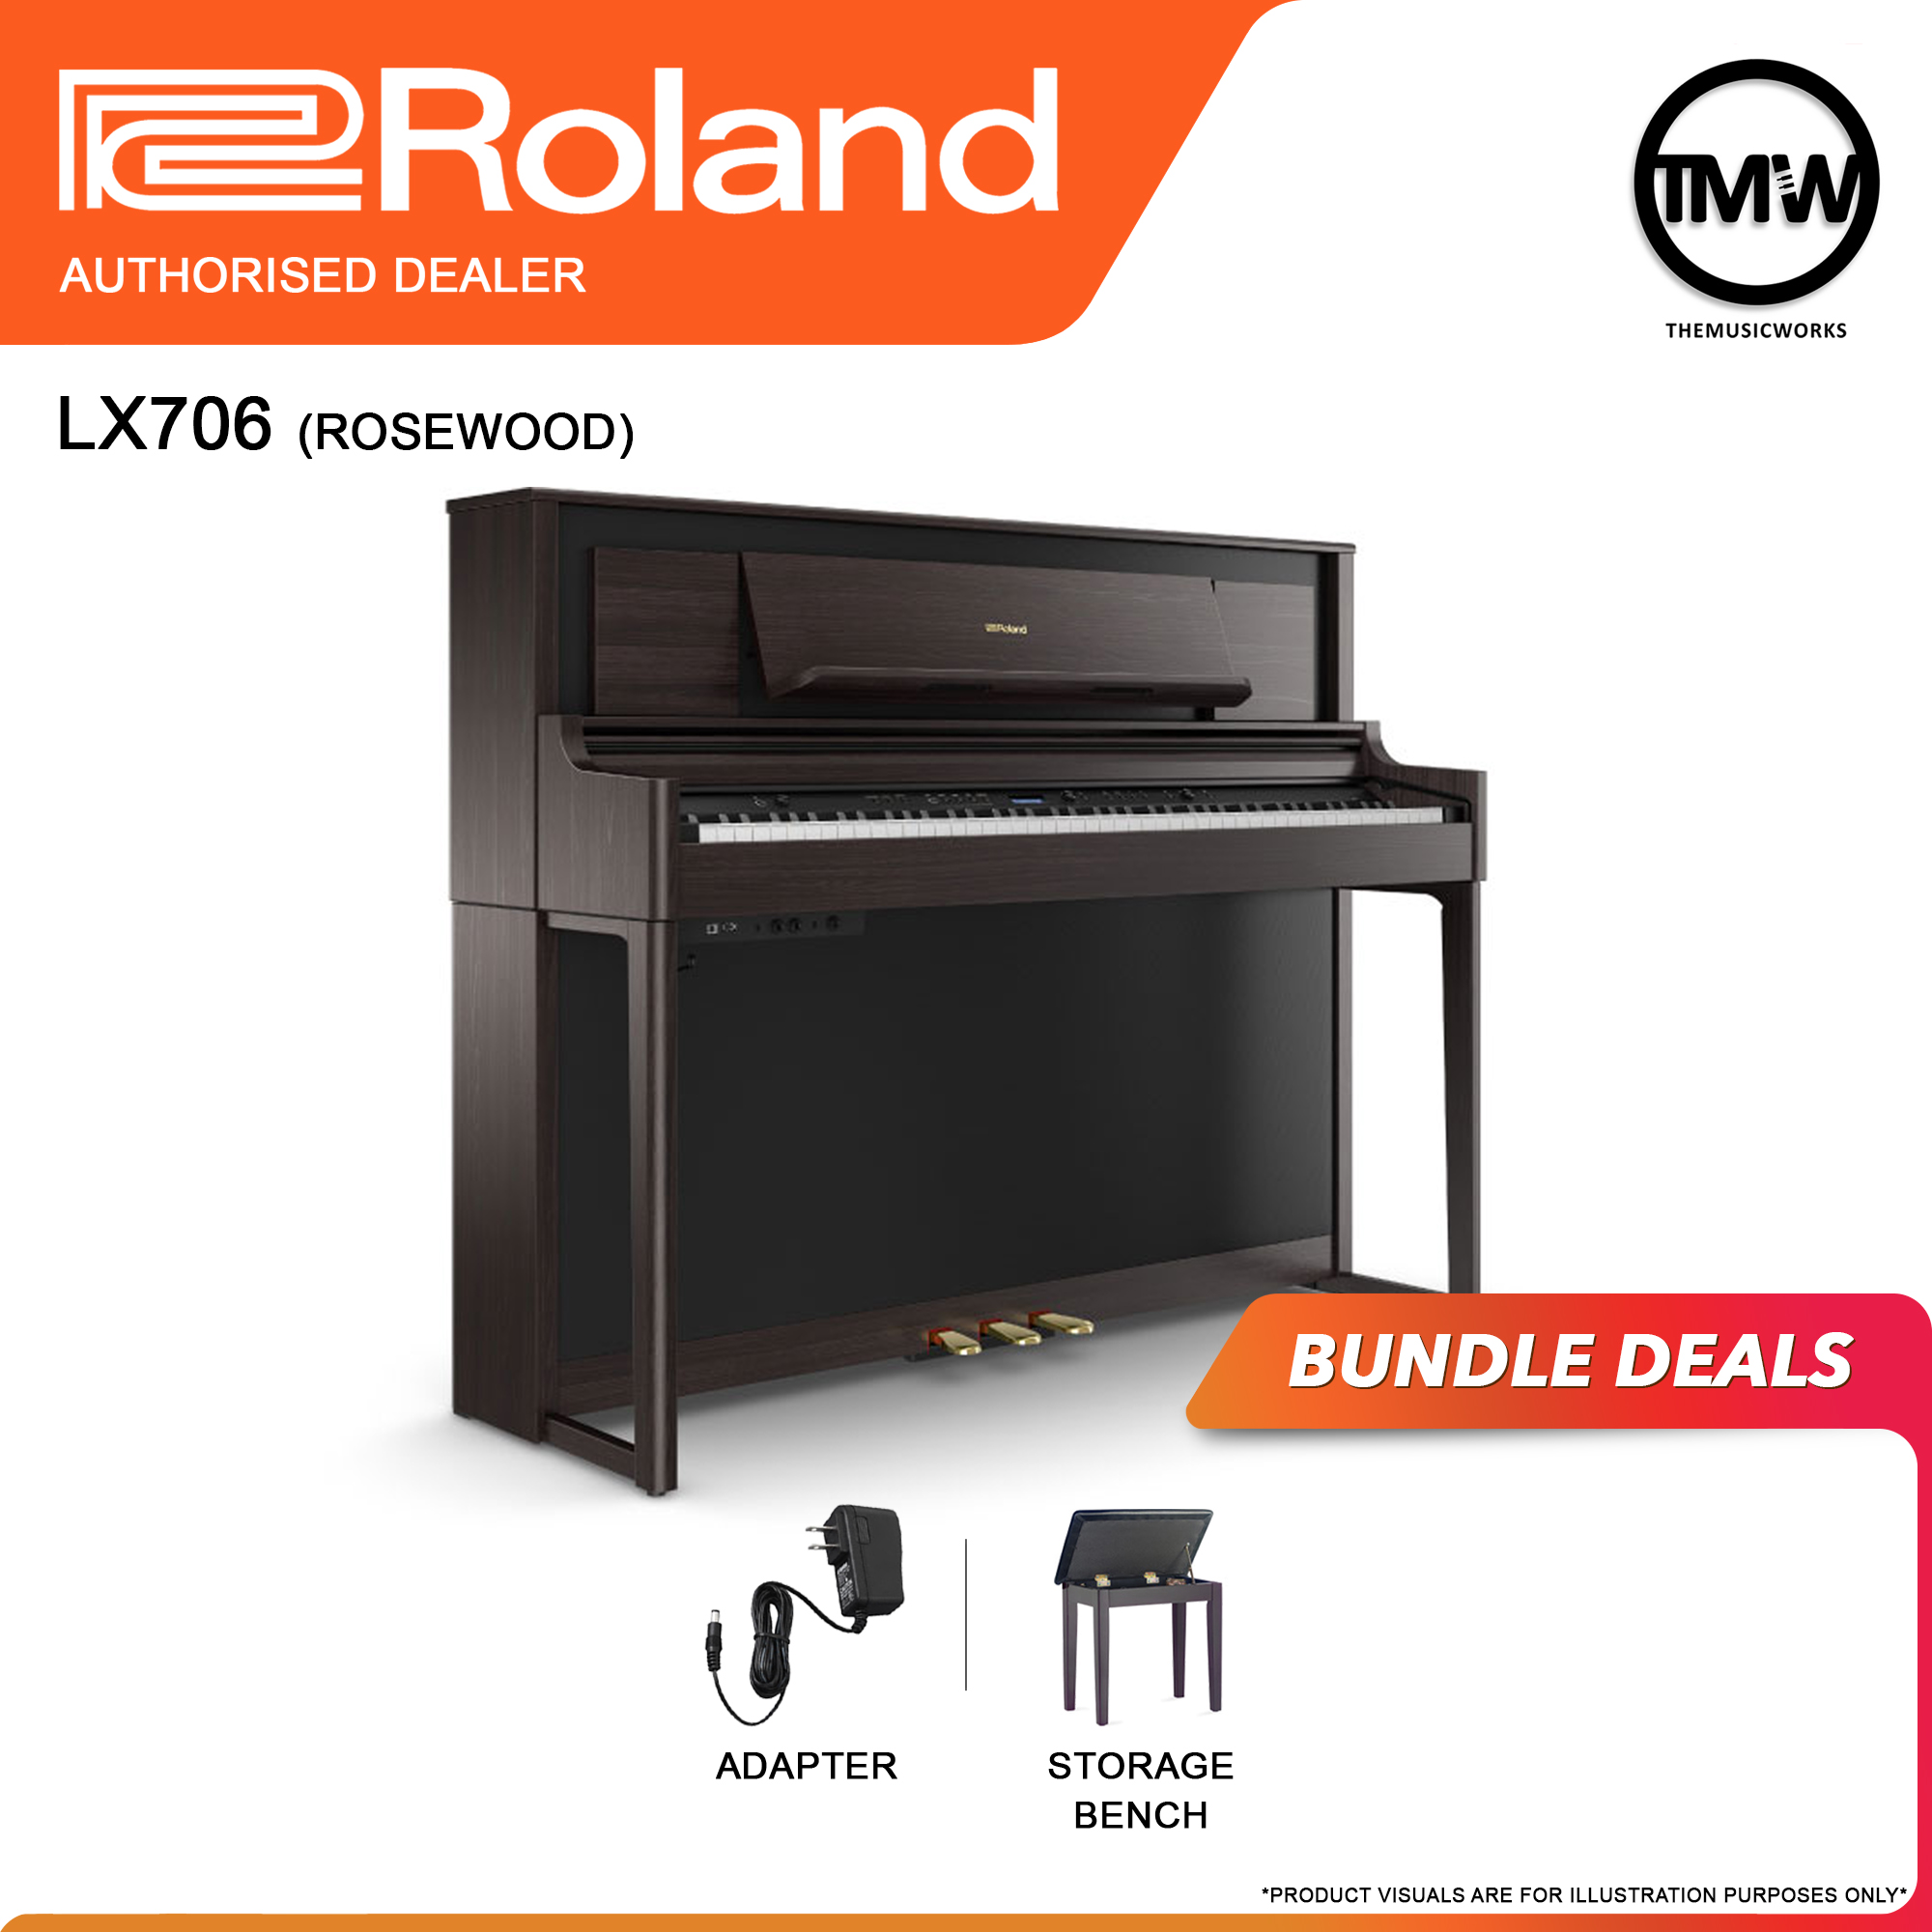 roland lx706 rosewood with adapter, and storage bench